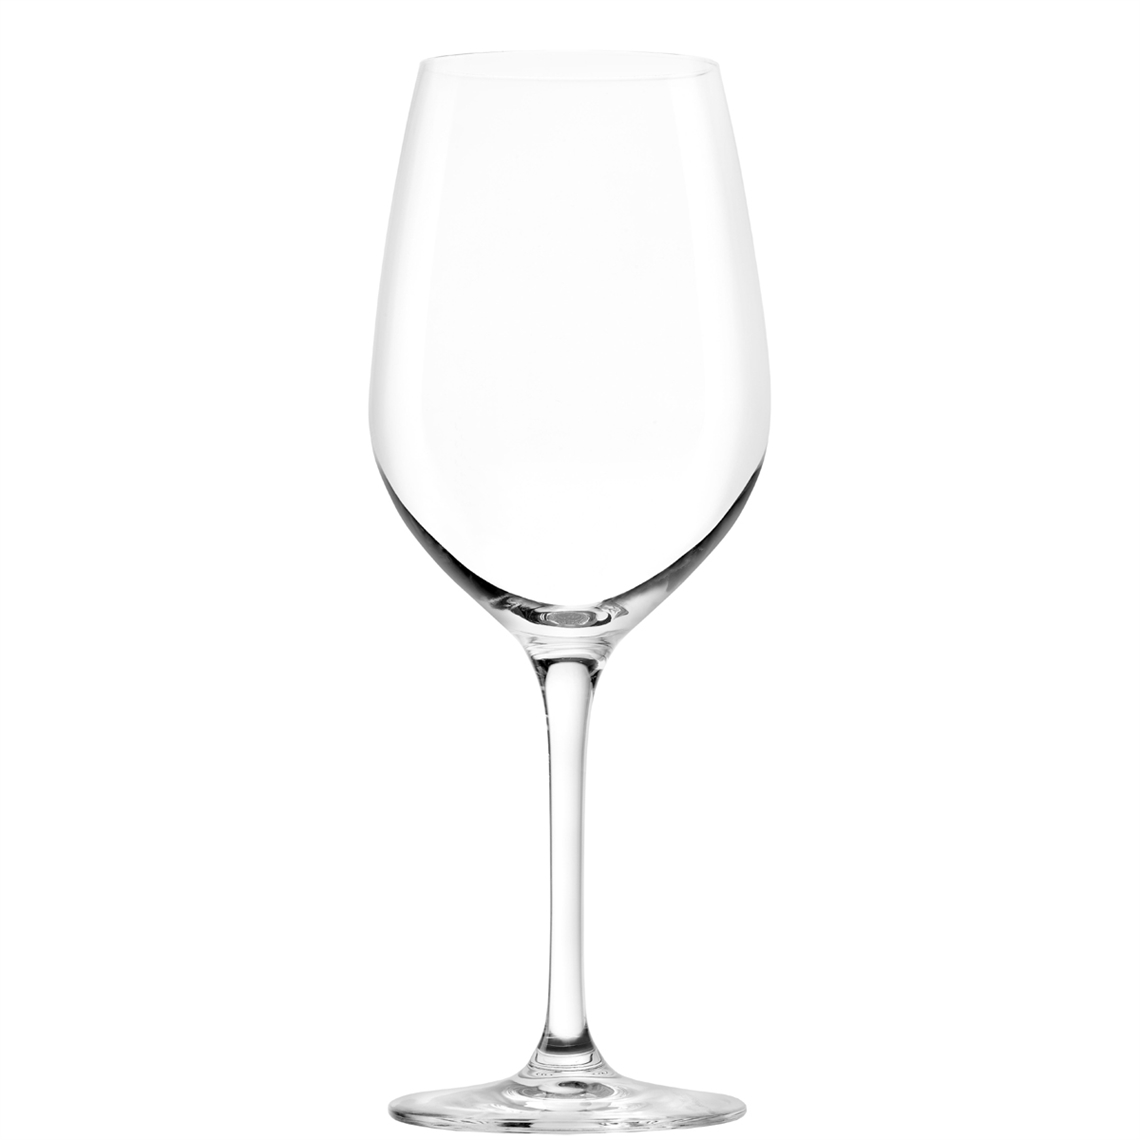 Stolzle Olly Smith Exuberance Collection White Wine Glass - Set of 4